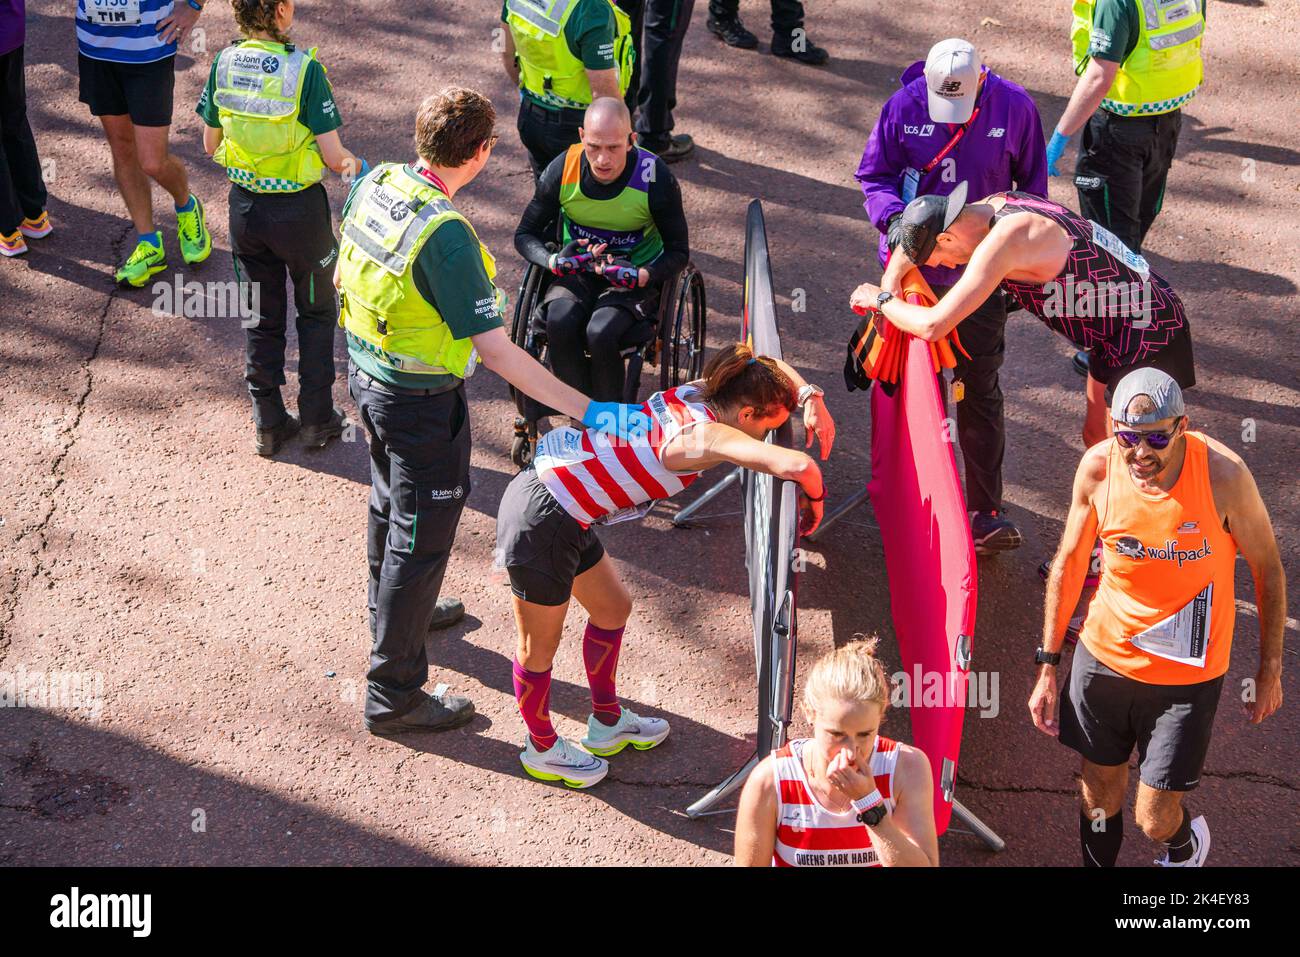 London UK. 2 October 2022 . A marathon runner  is helped by paramedics after crossing the finishing line at The Mall .More than  40,000 athletes including  elite  runners, club runners and fun runners   take  part in the London Marathon sponsored by TCS Tata Consultancy Services over a 26.2 mile course.Credit: amer ghazzal/Alamy Live News. Stock Photo